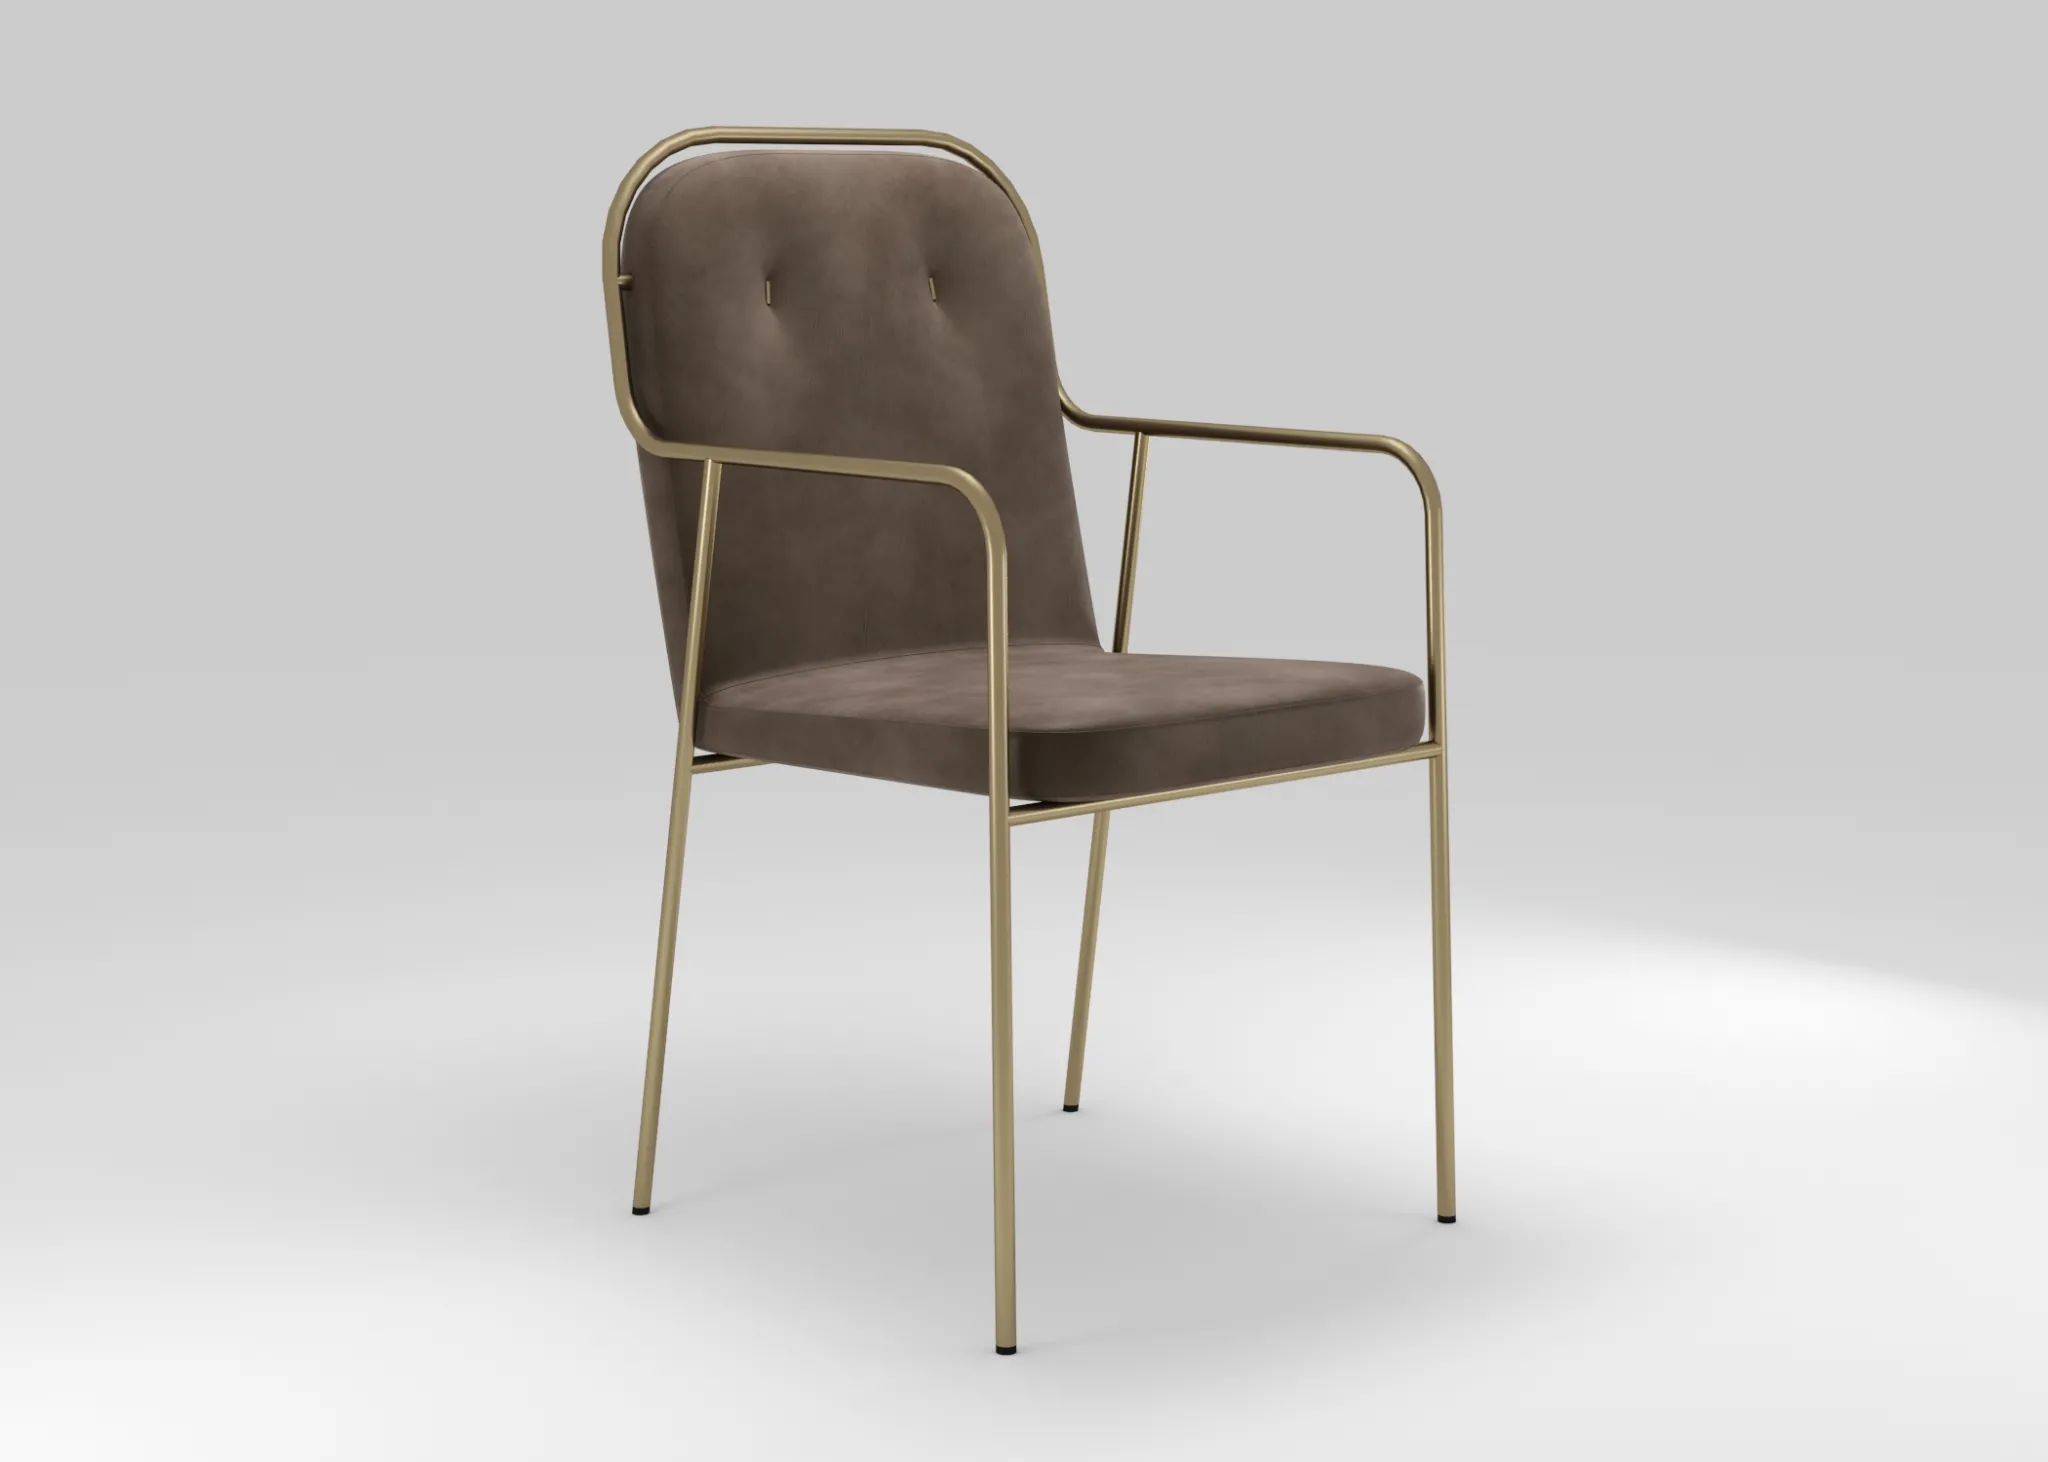 FURNITURE 3D MODELS – CHAIRS – 0422